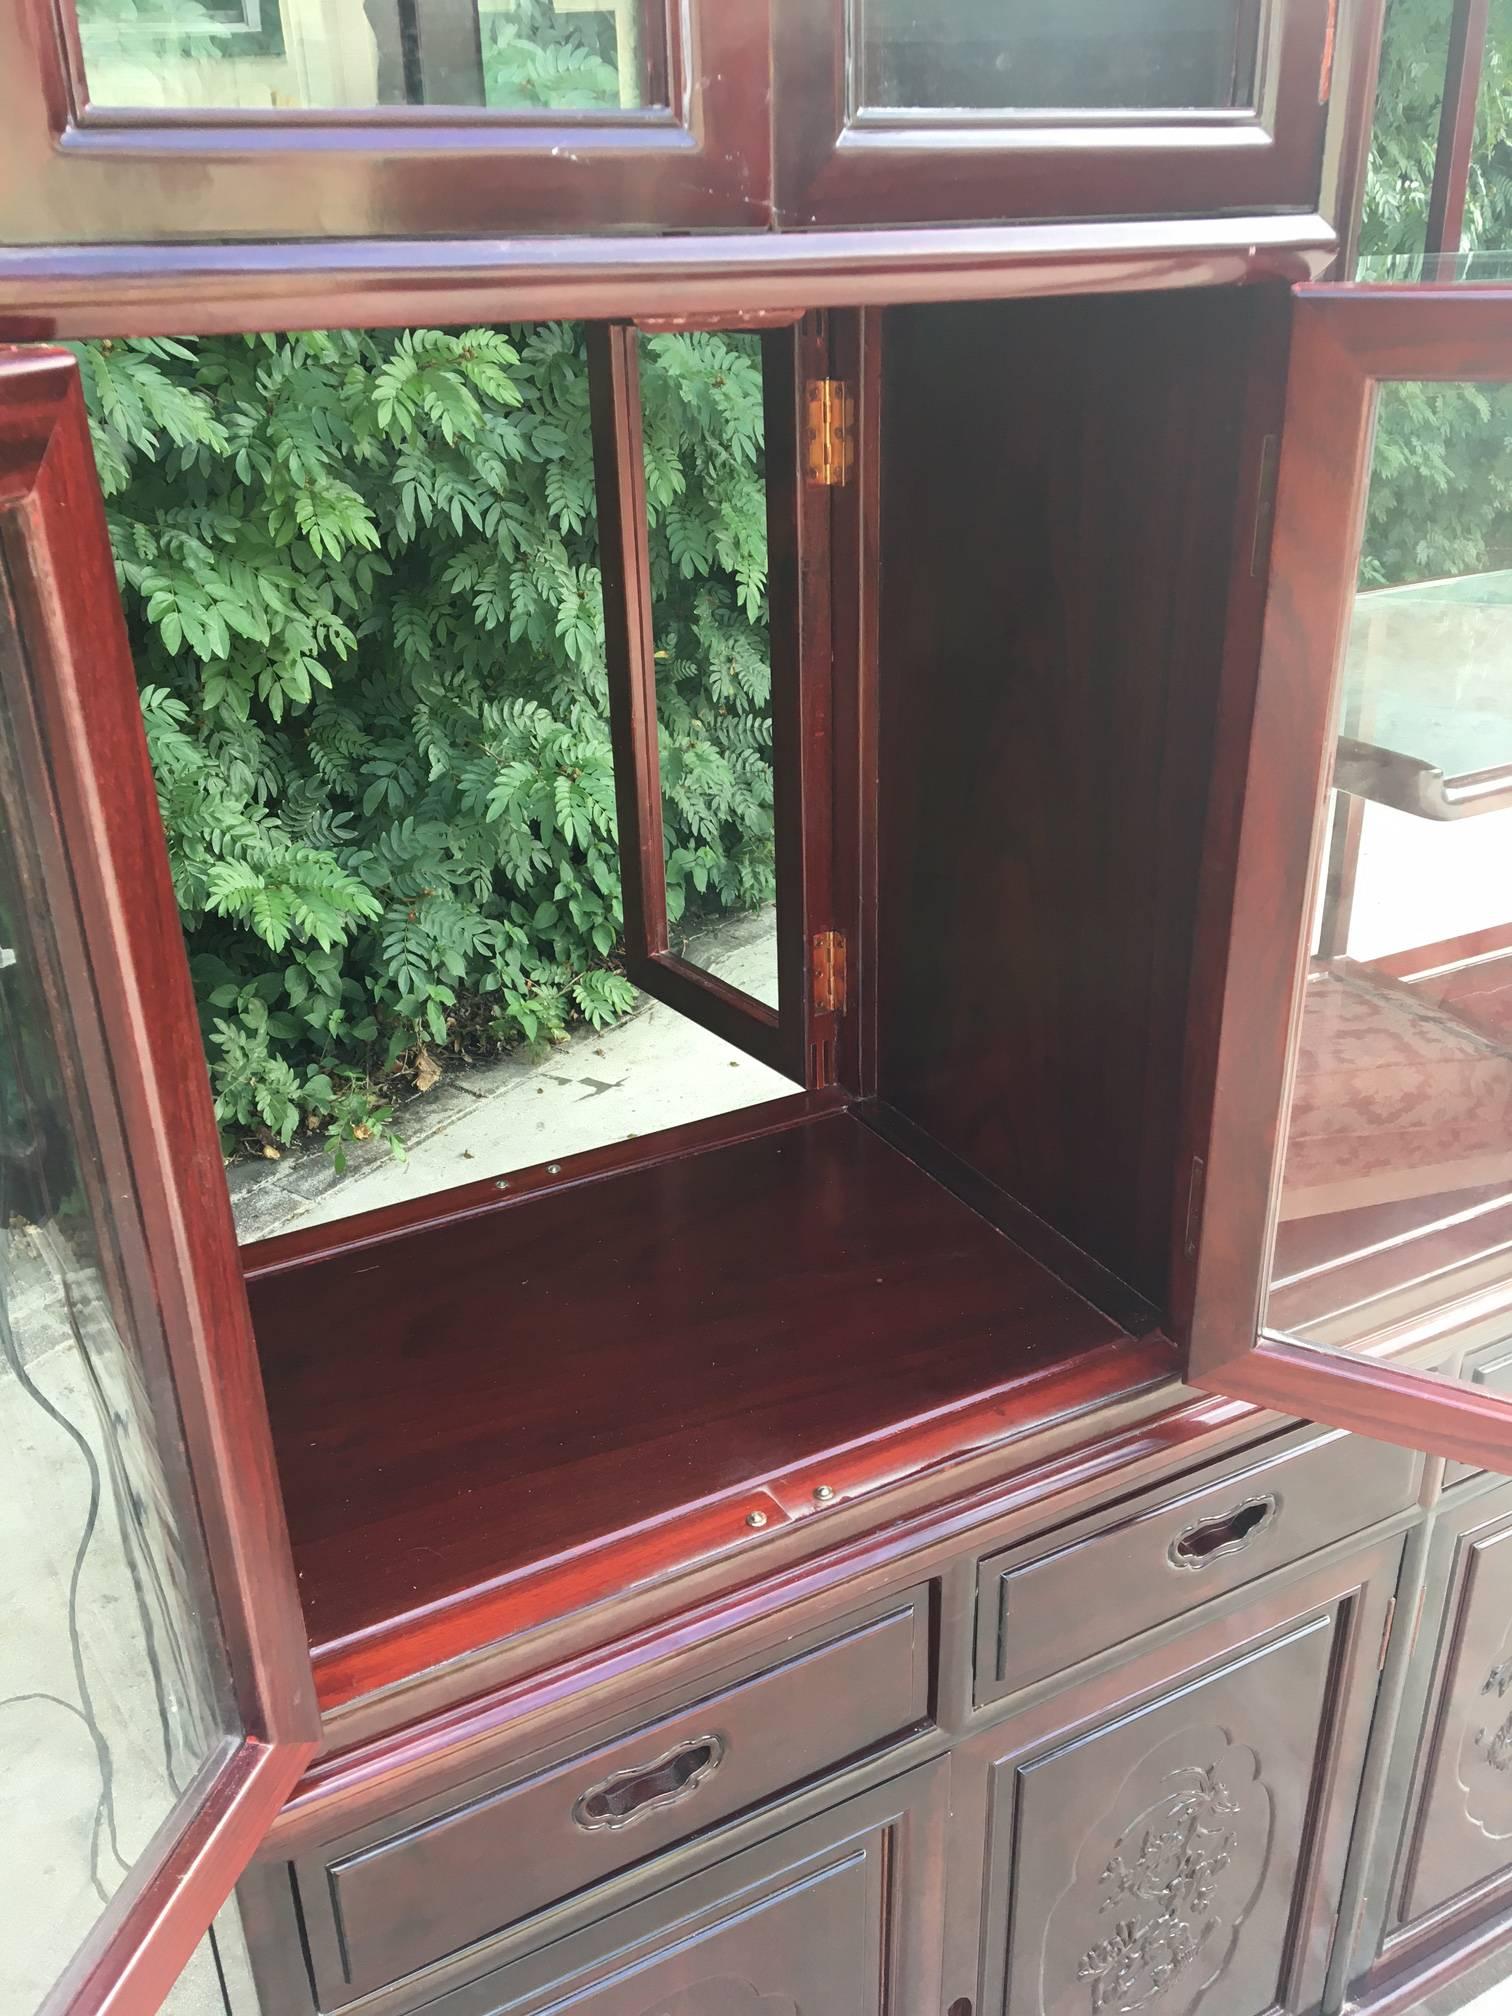 Unusual lighted Chinese chinoiserie hutch features a two-sided design. Drawers open from either side. Top and bottom cabinet doors reveal storage from either side. Three glass shelves in etagere section. Made from antique redwood. Brand emblem